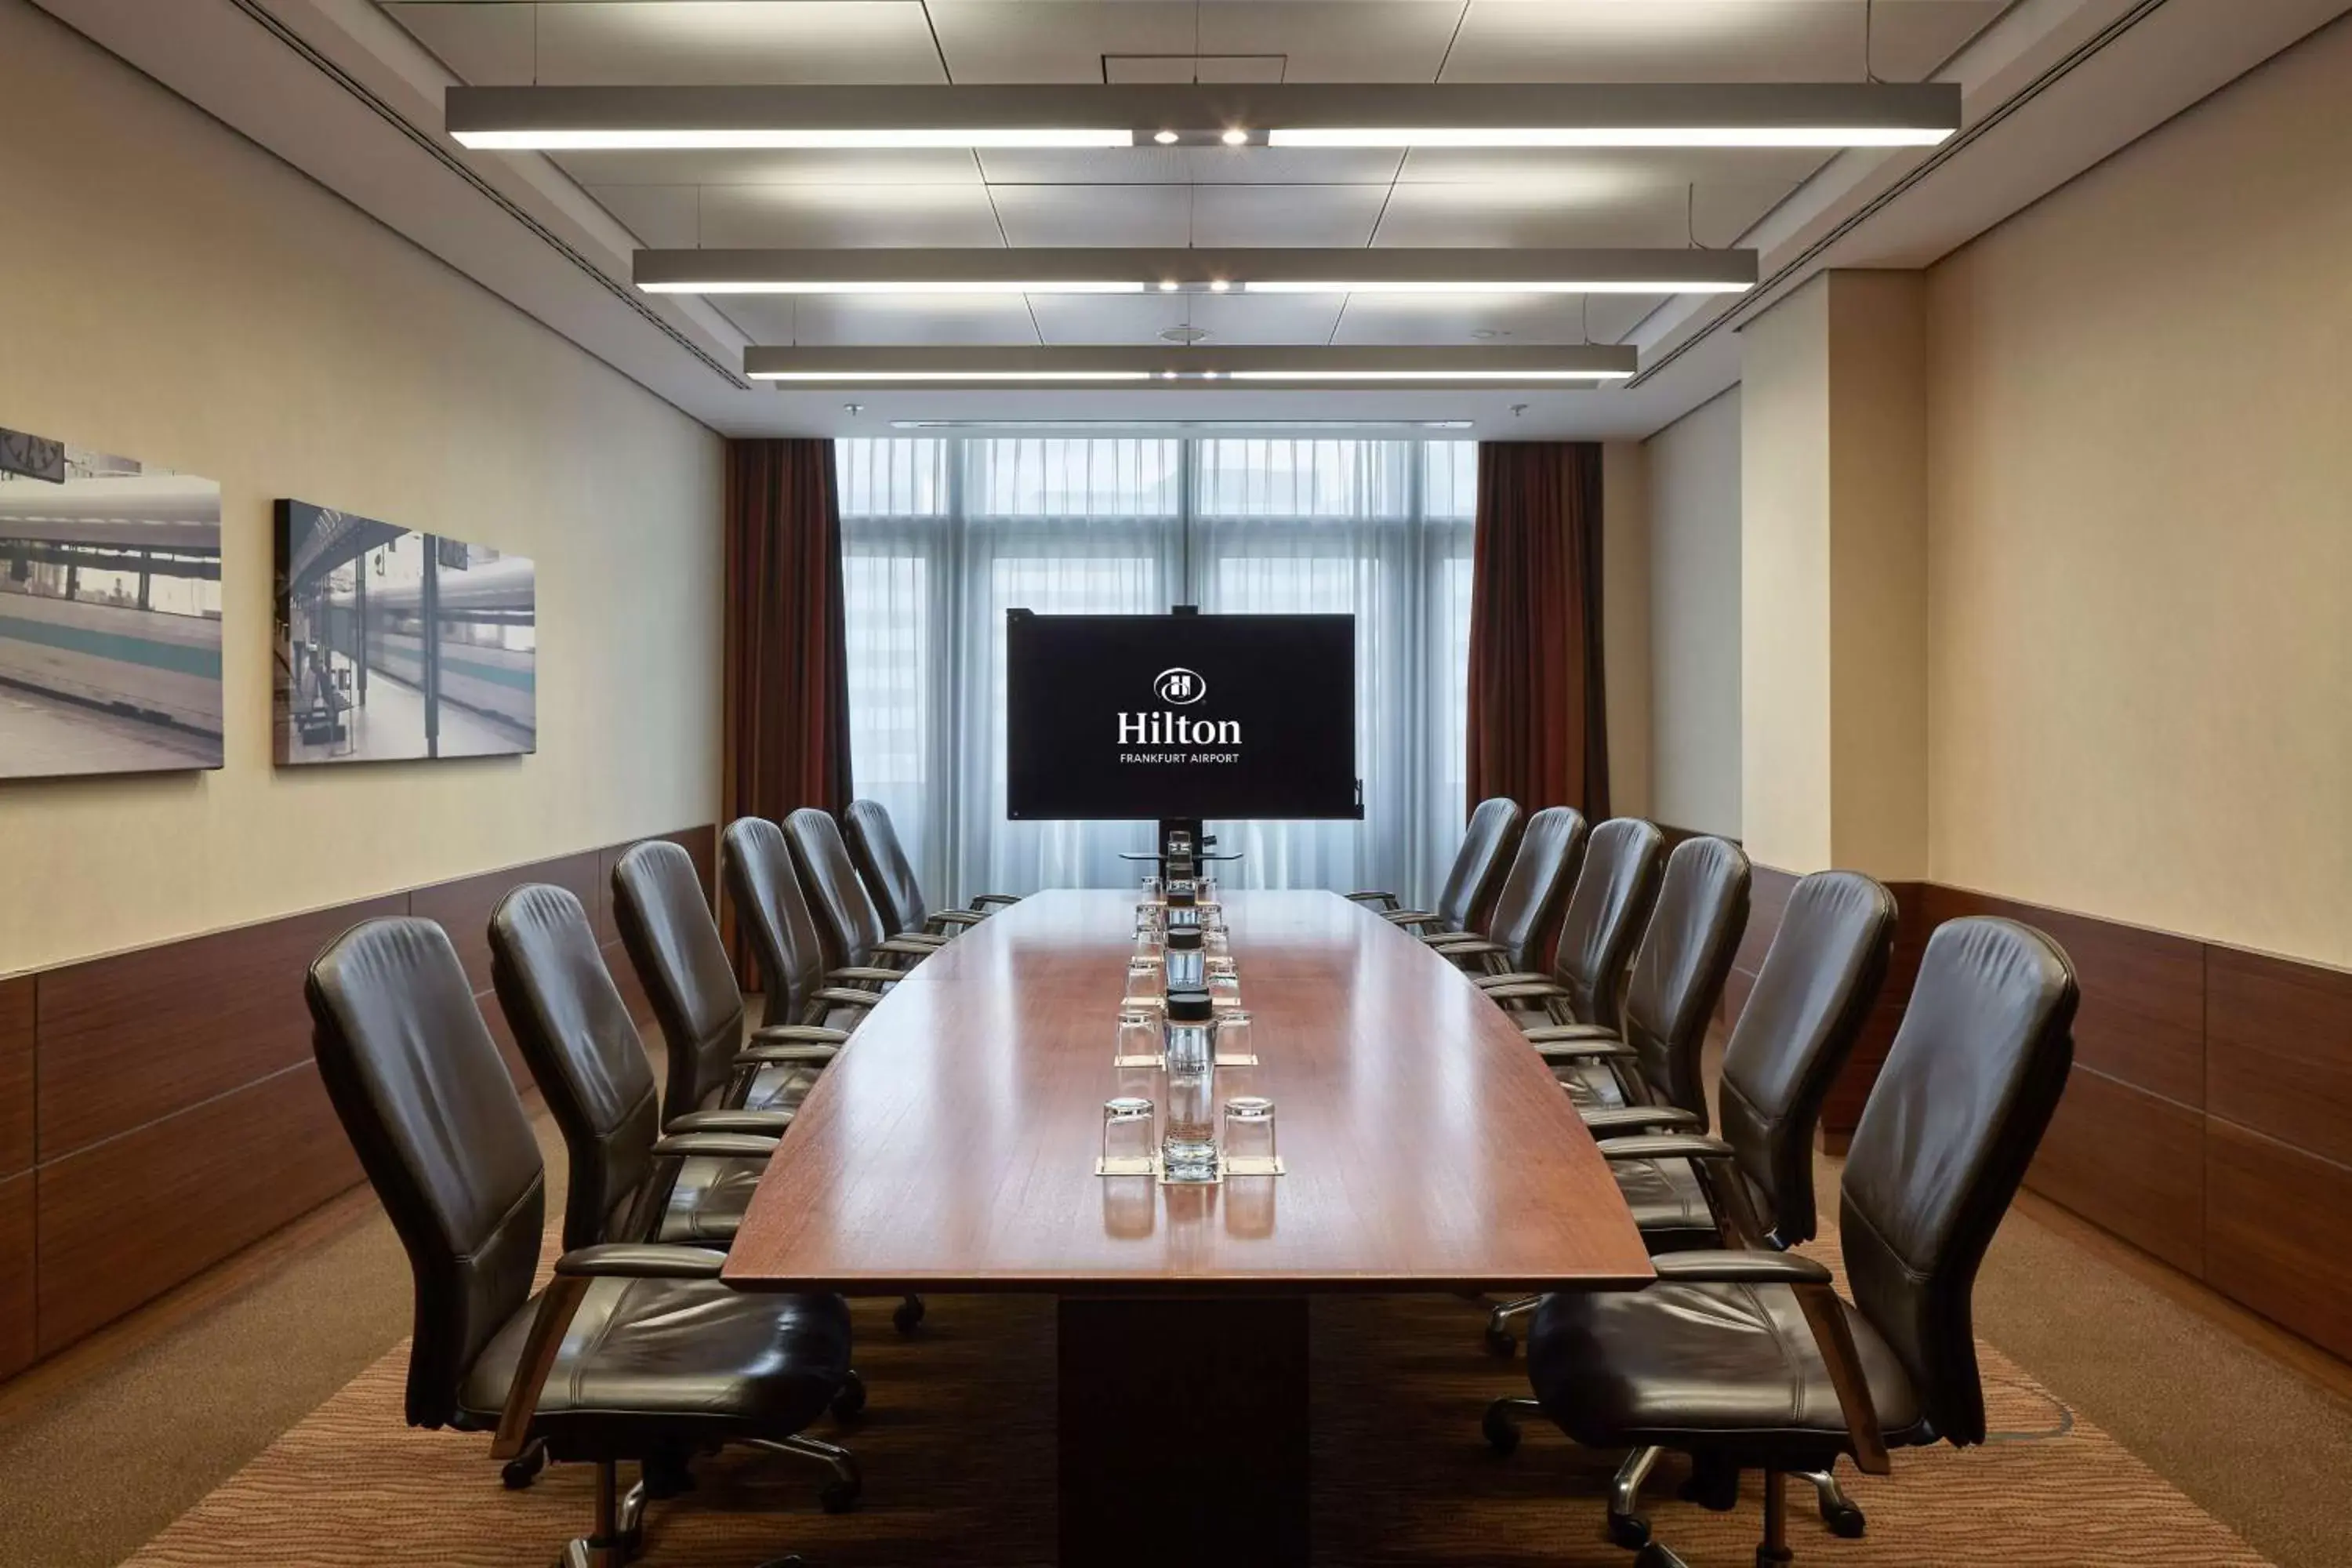 Meeting/conference room in Hilton Frankfurt Airport